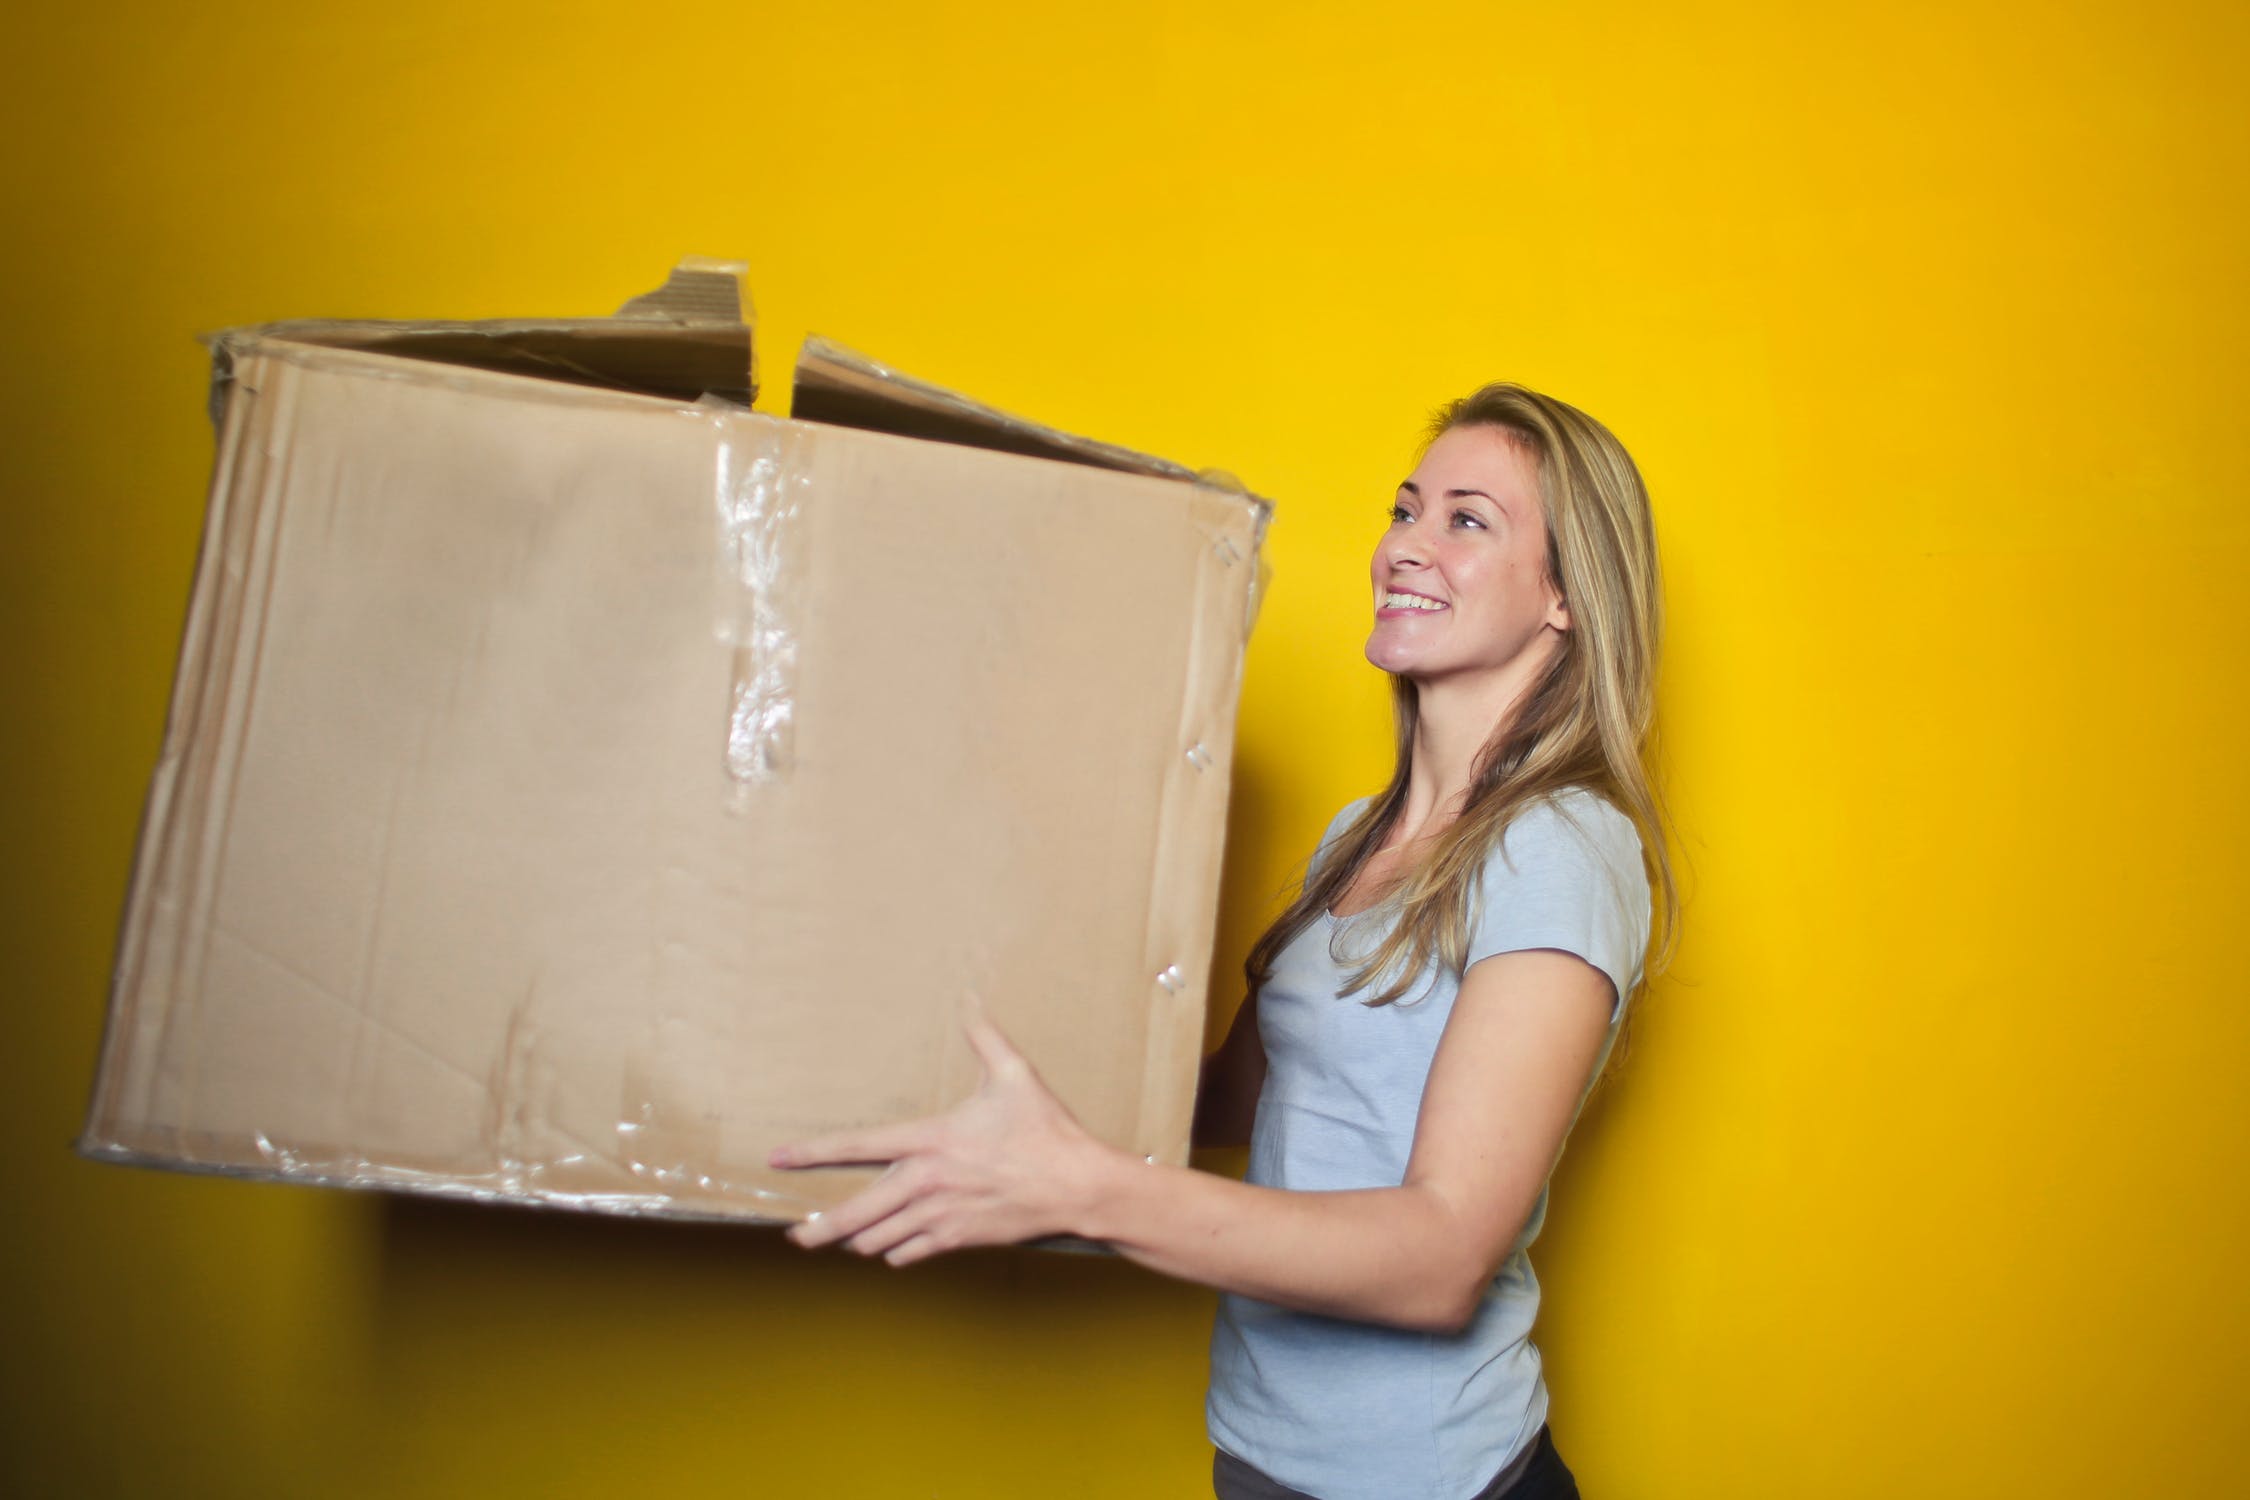 Top 10 Moving House Fails and how to avoid them - Ants Removals Ltd